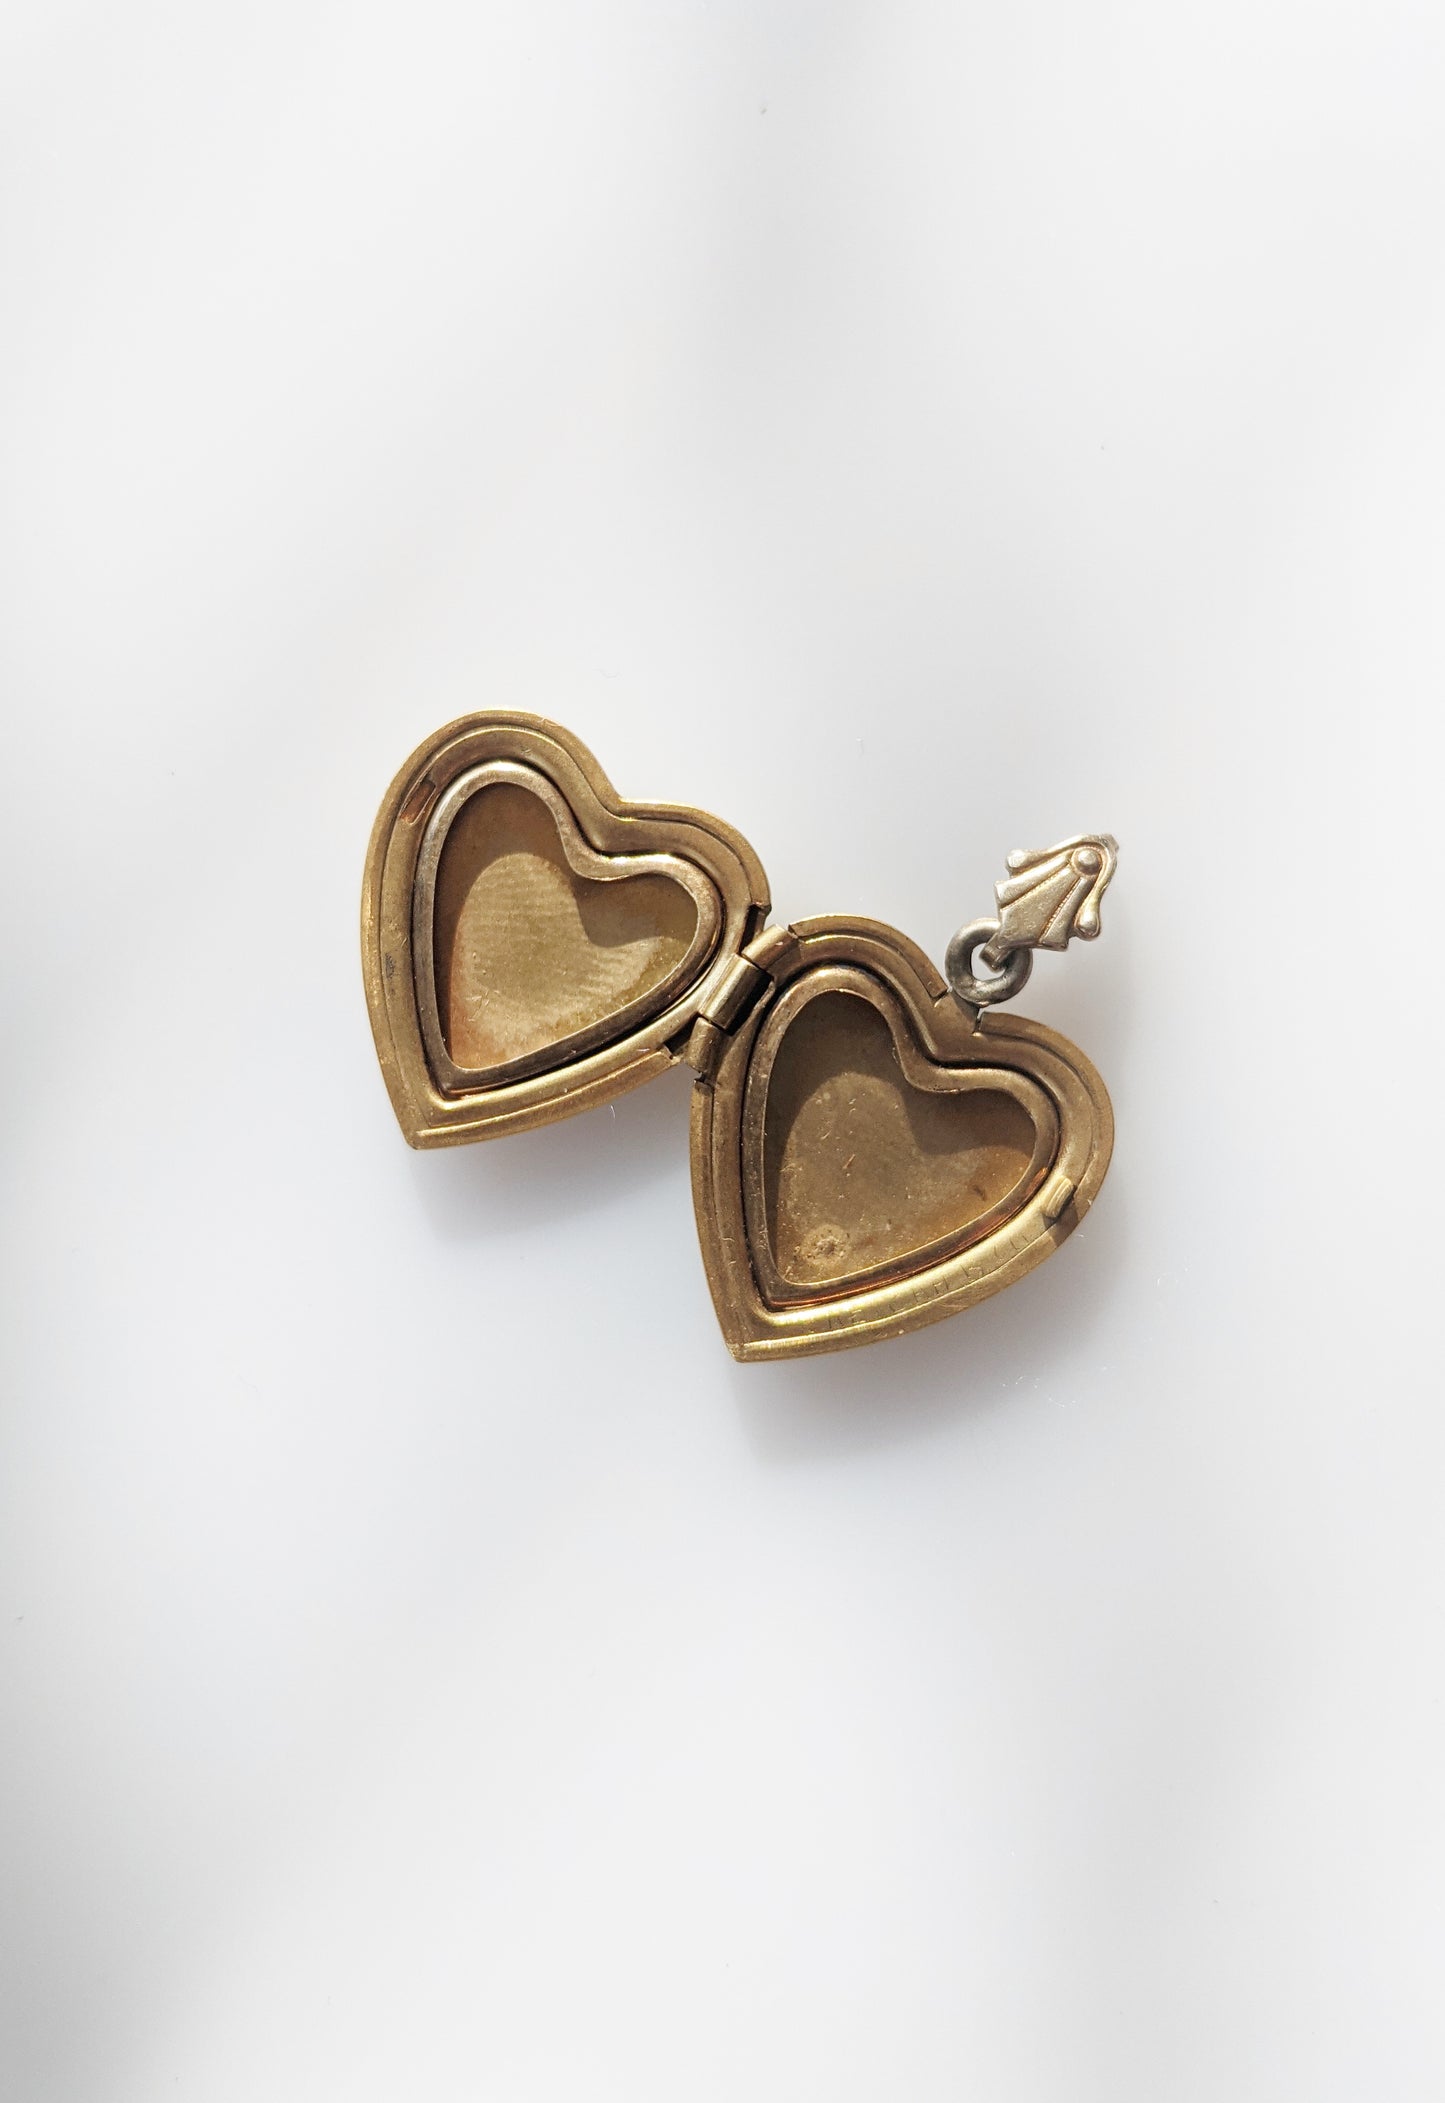 Vintage Gold Heart-Shaped Locket | Double Heart and Flower Motif